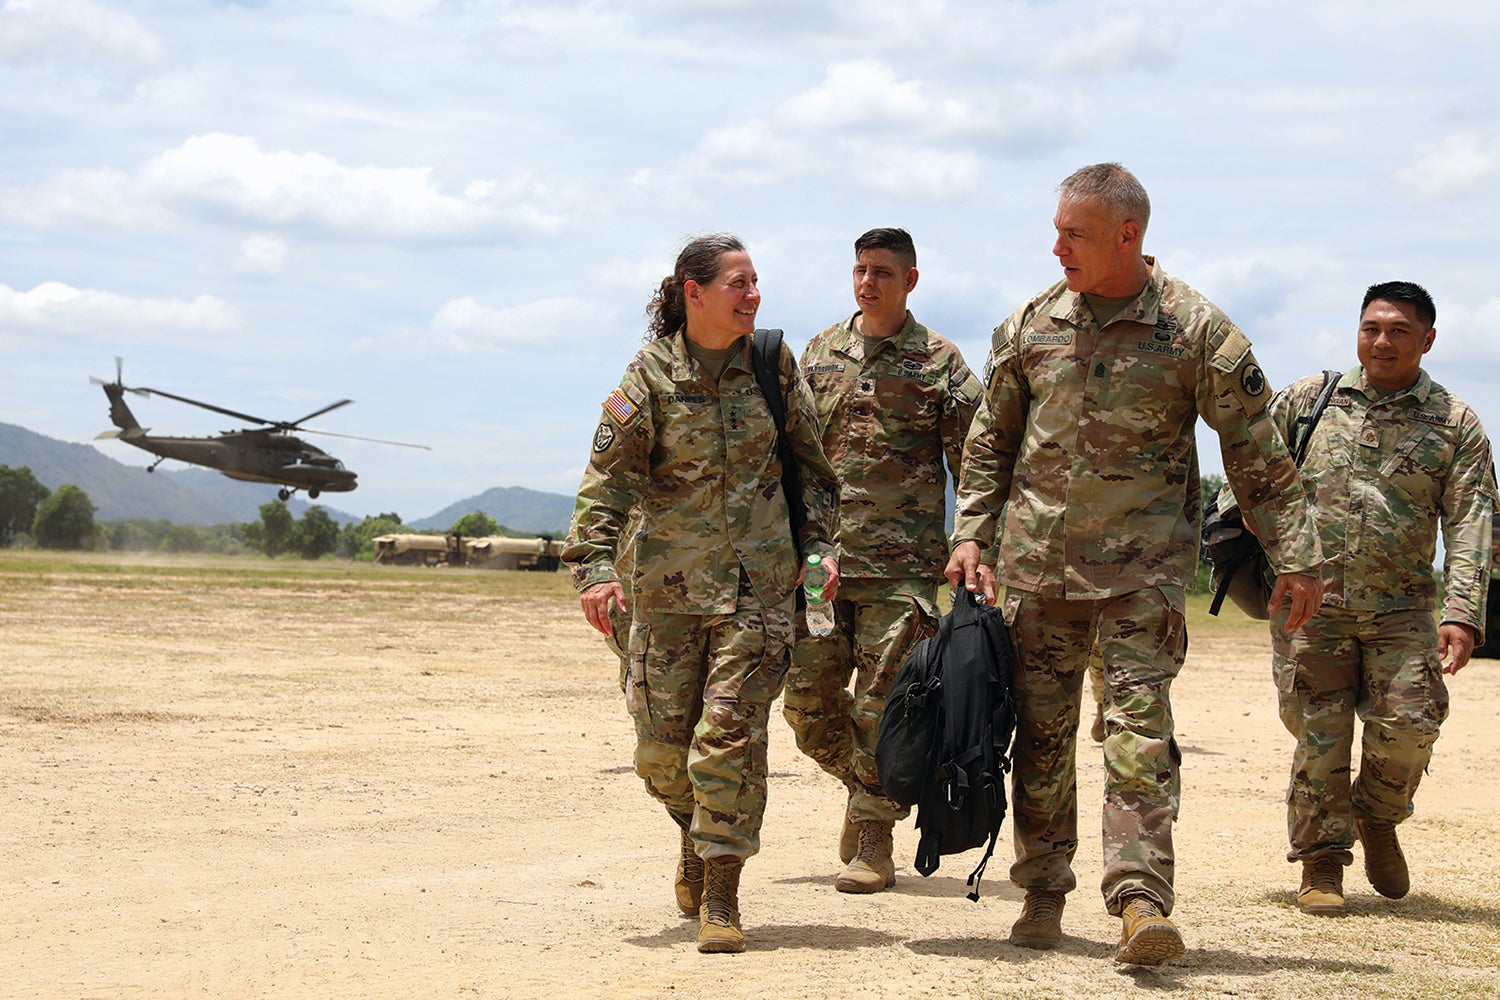 Lt. Gen. Jody Daniels, left, chief of the U.S. Army Reserve and commanding general of the U.S. Army Reserve Command, and her staff arrive to observe an exercise in Lop Buri, Thailand. (Credit: U.S. Army/Sgt. 1st Class Joseph VonNida)